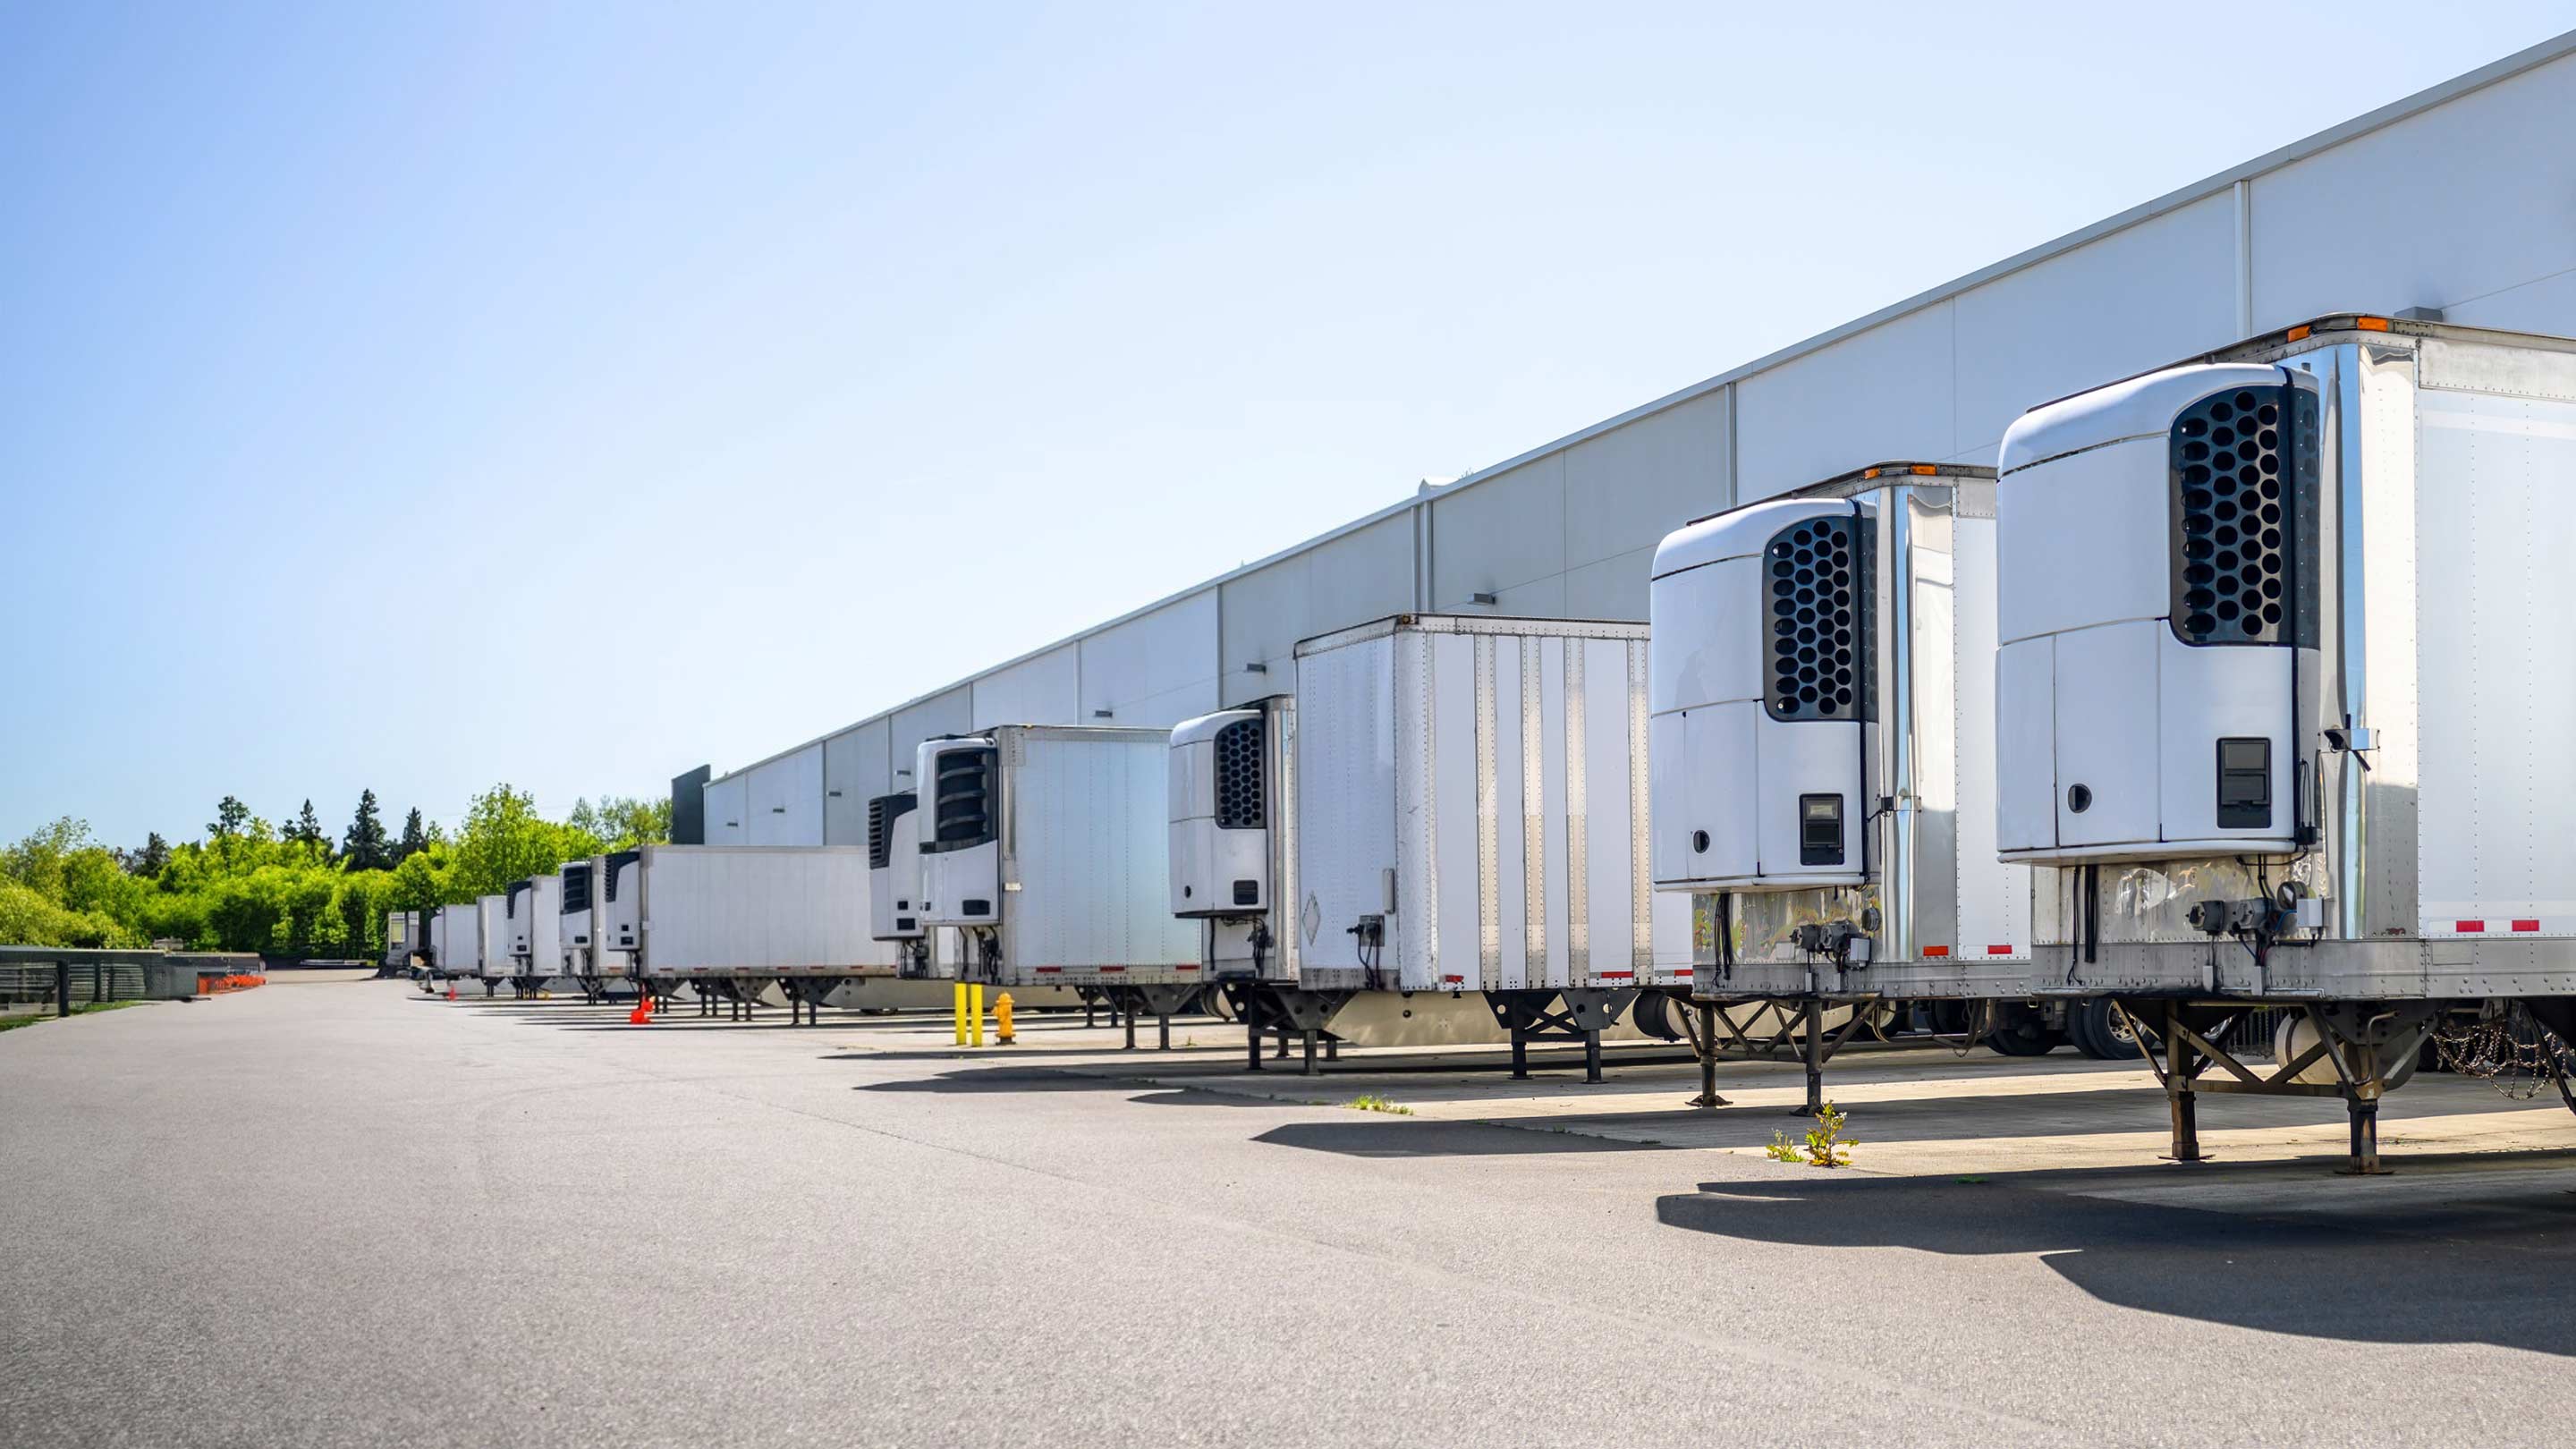 Trailers parked at a warehouse disconnected from trucks